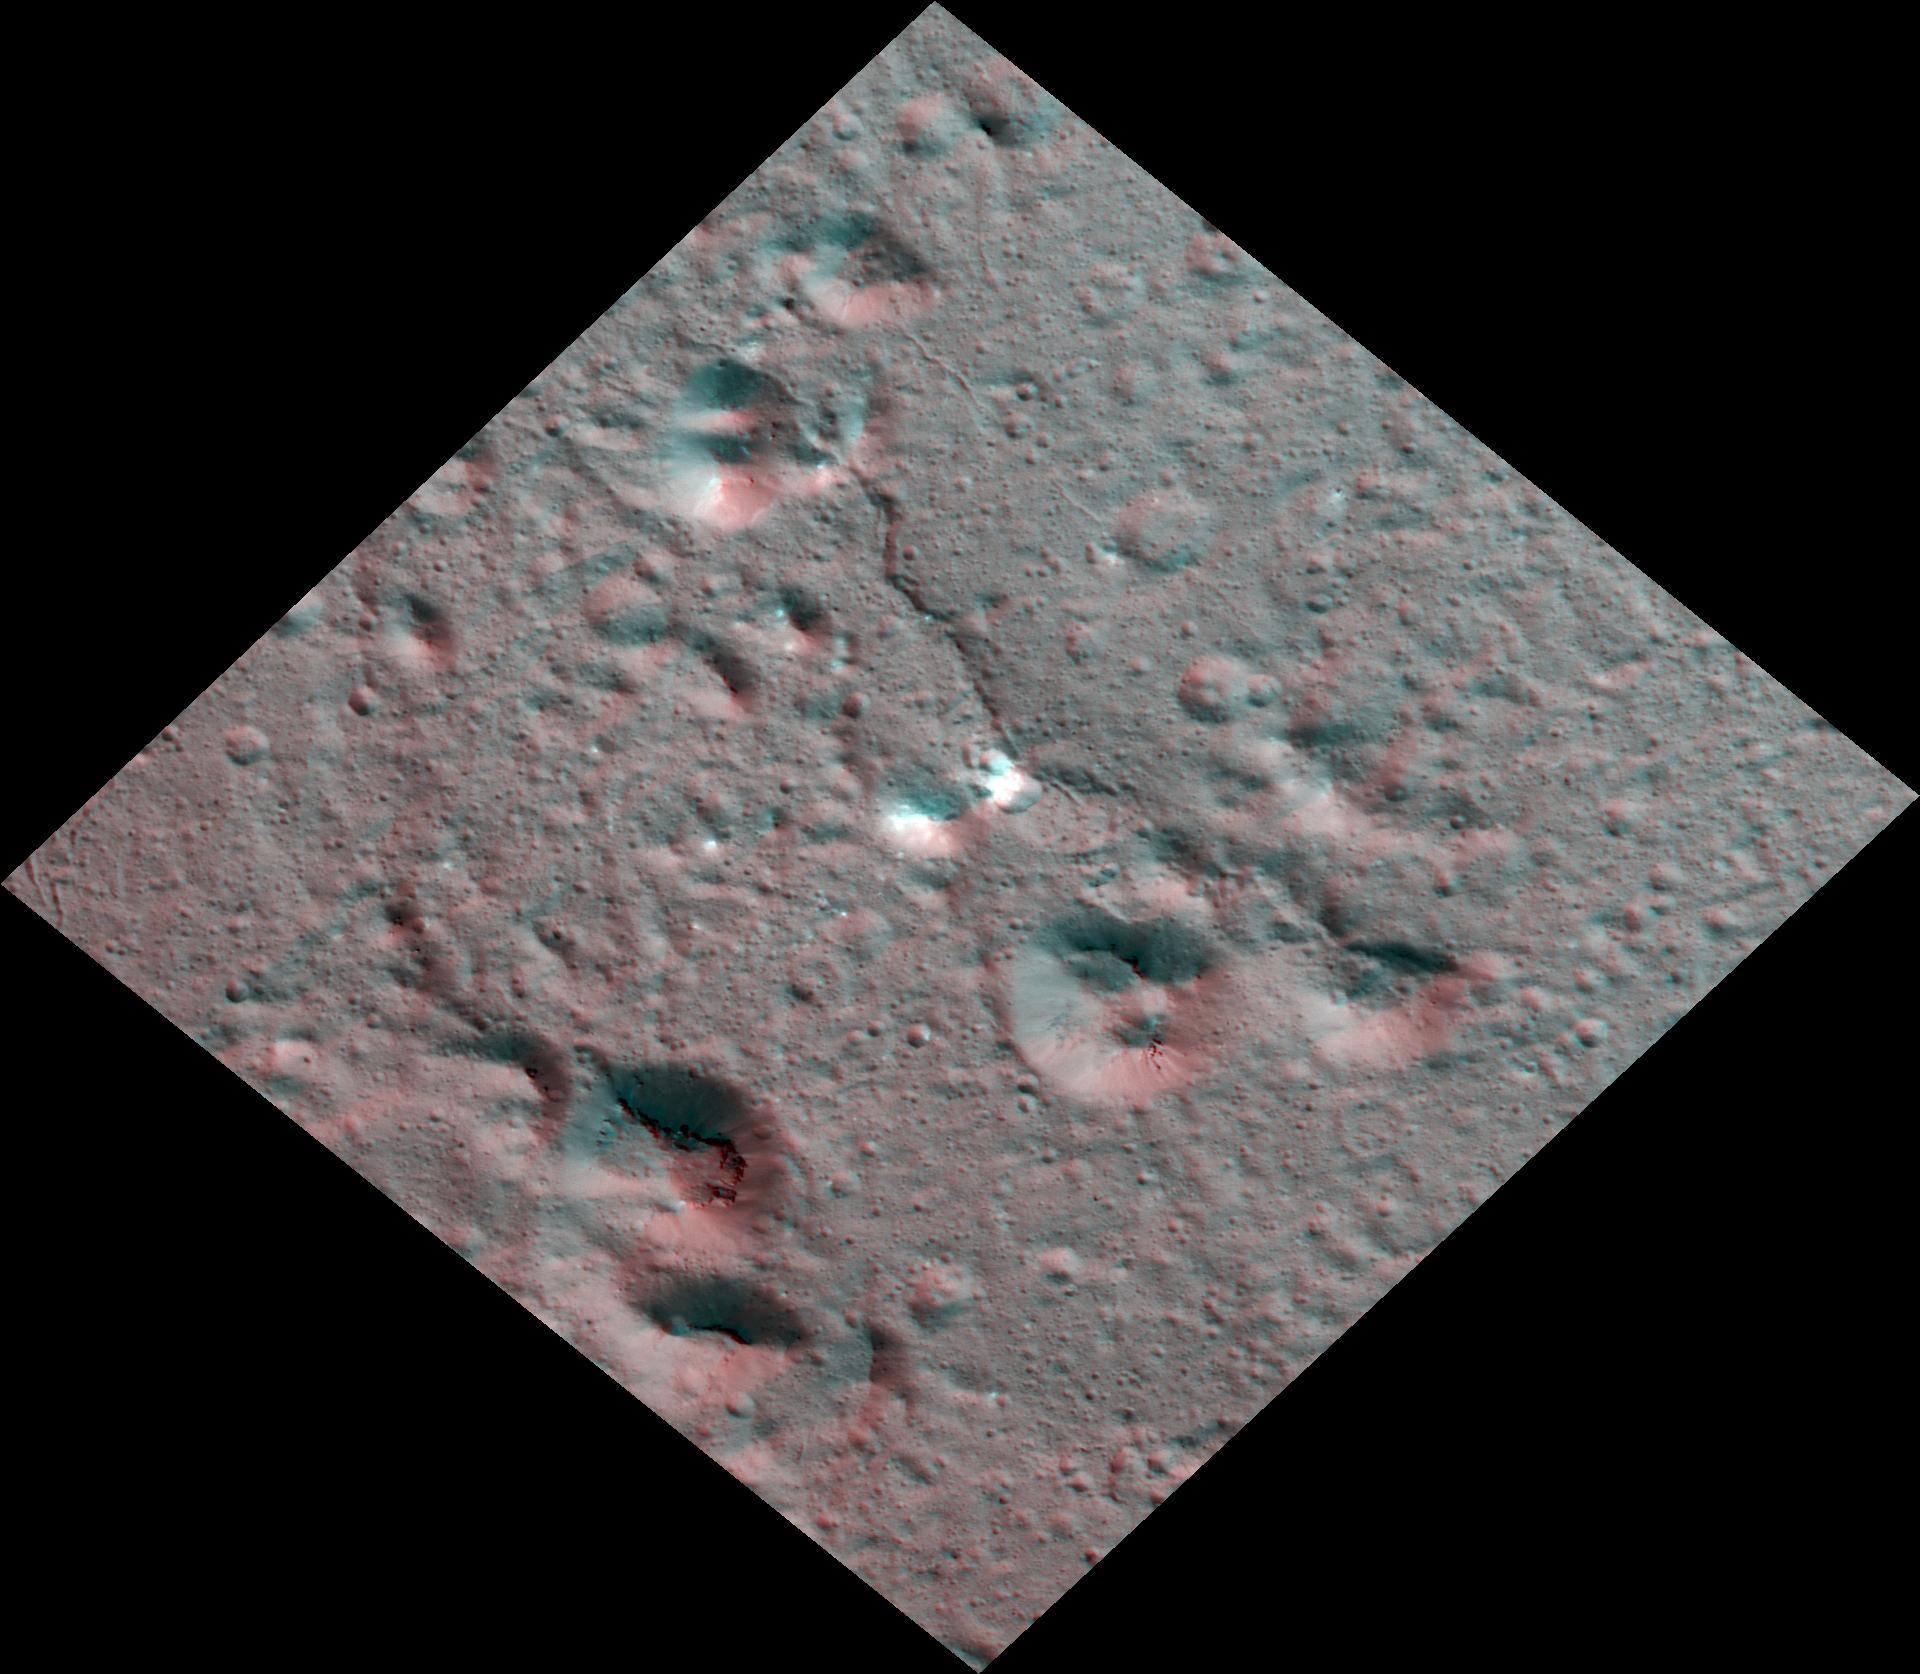 PIA24063: Dawn Stereo Anaglyph of Hydrothermal Deposits at Occator Crater, Ceres